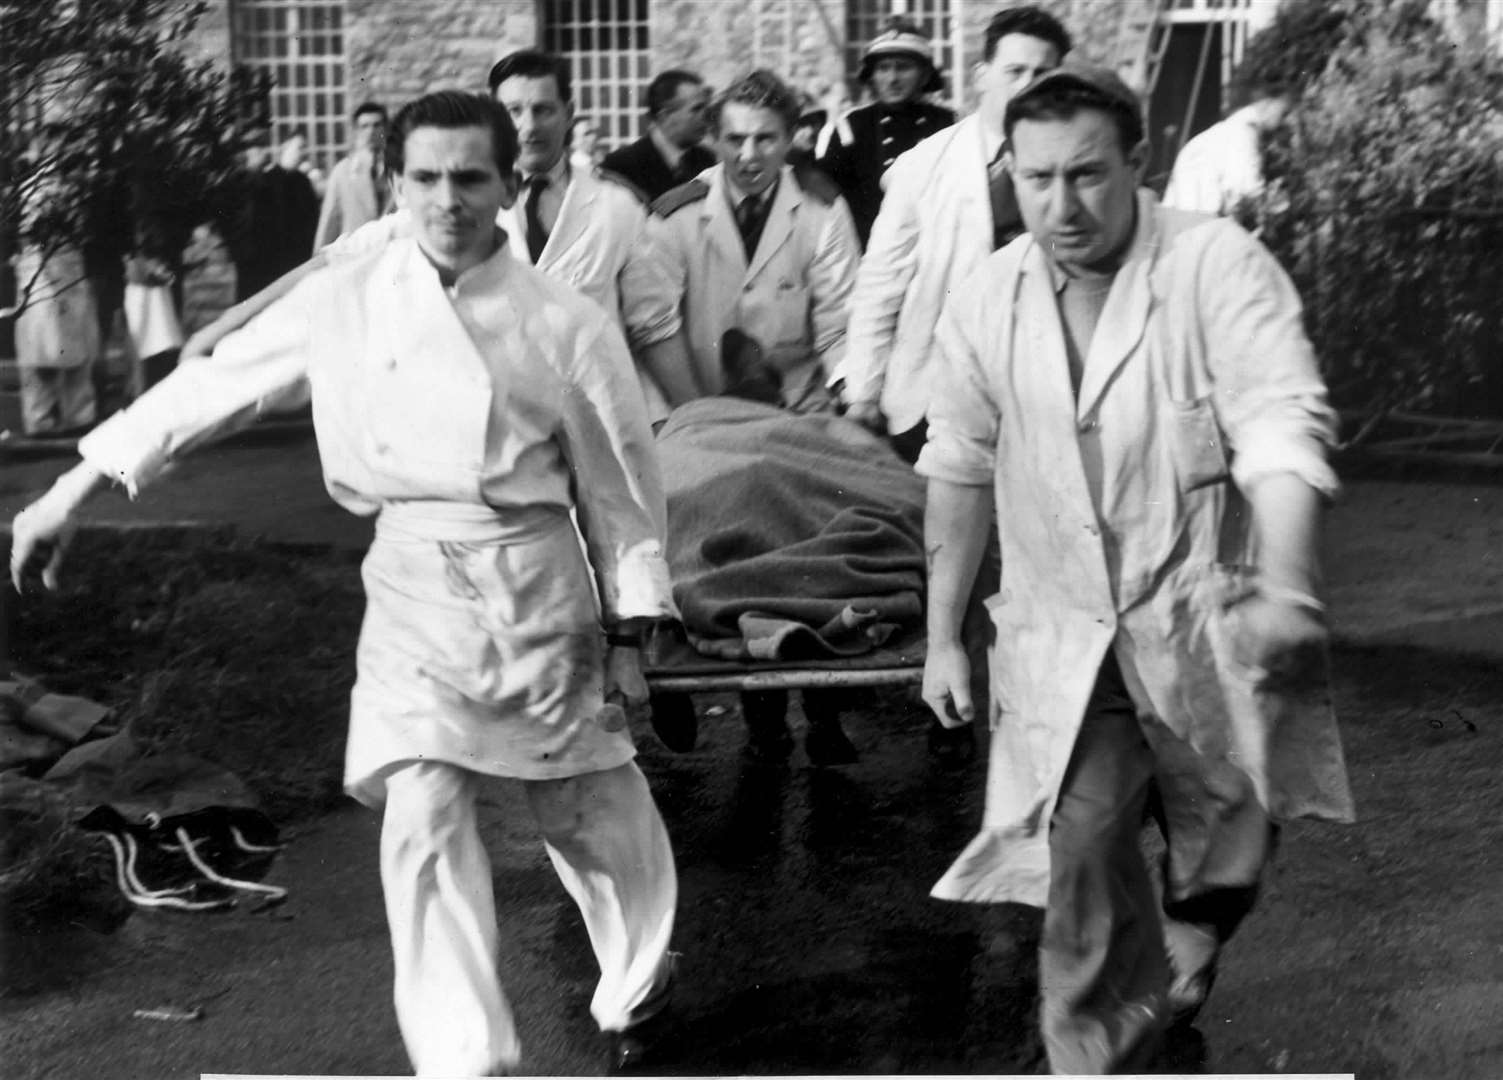 Hospital staff bring a casualty from the building during the fire at Oakwood Hospital, Maidstone, in November 1957